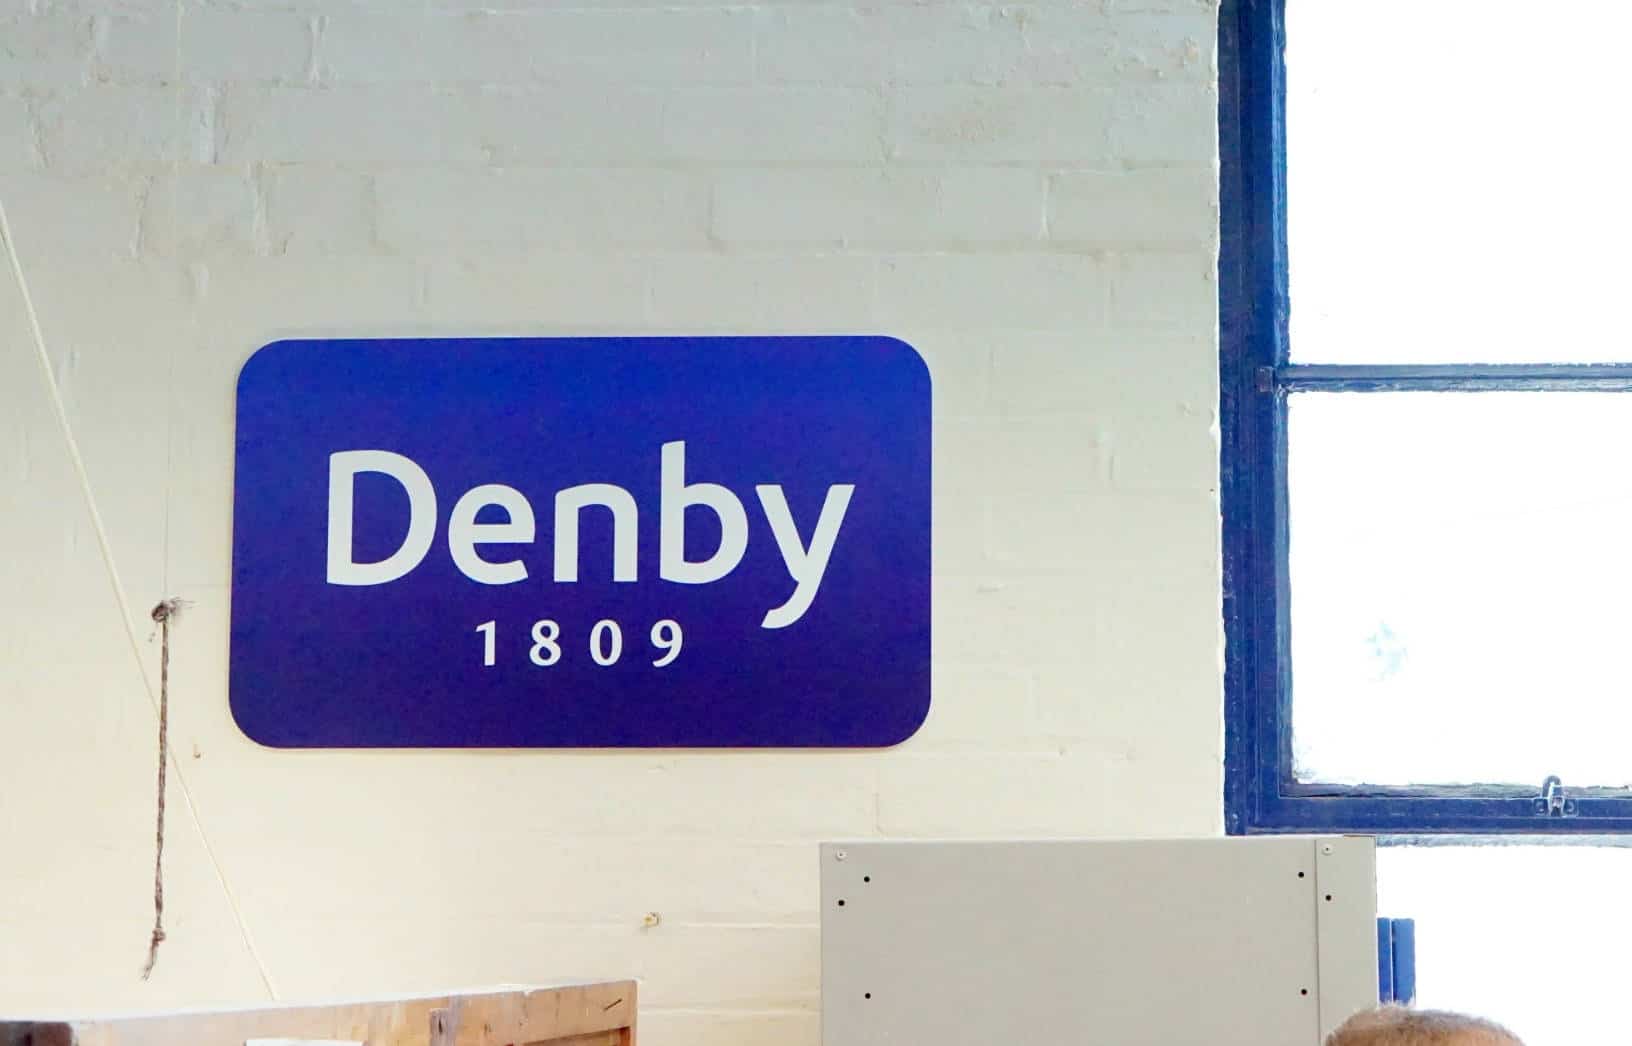 From Clay To Cup, A Day With Denby, inside the Debby Factory www.extraordinarychaos.com